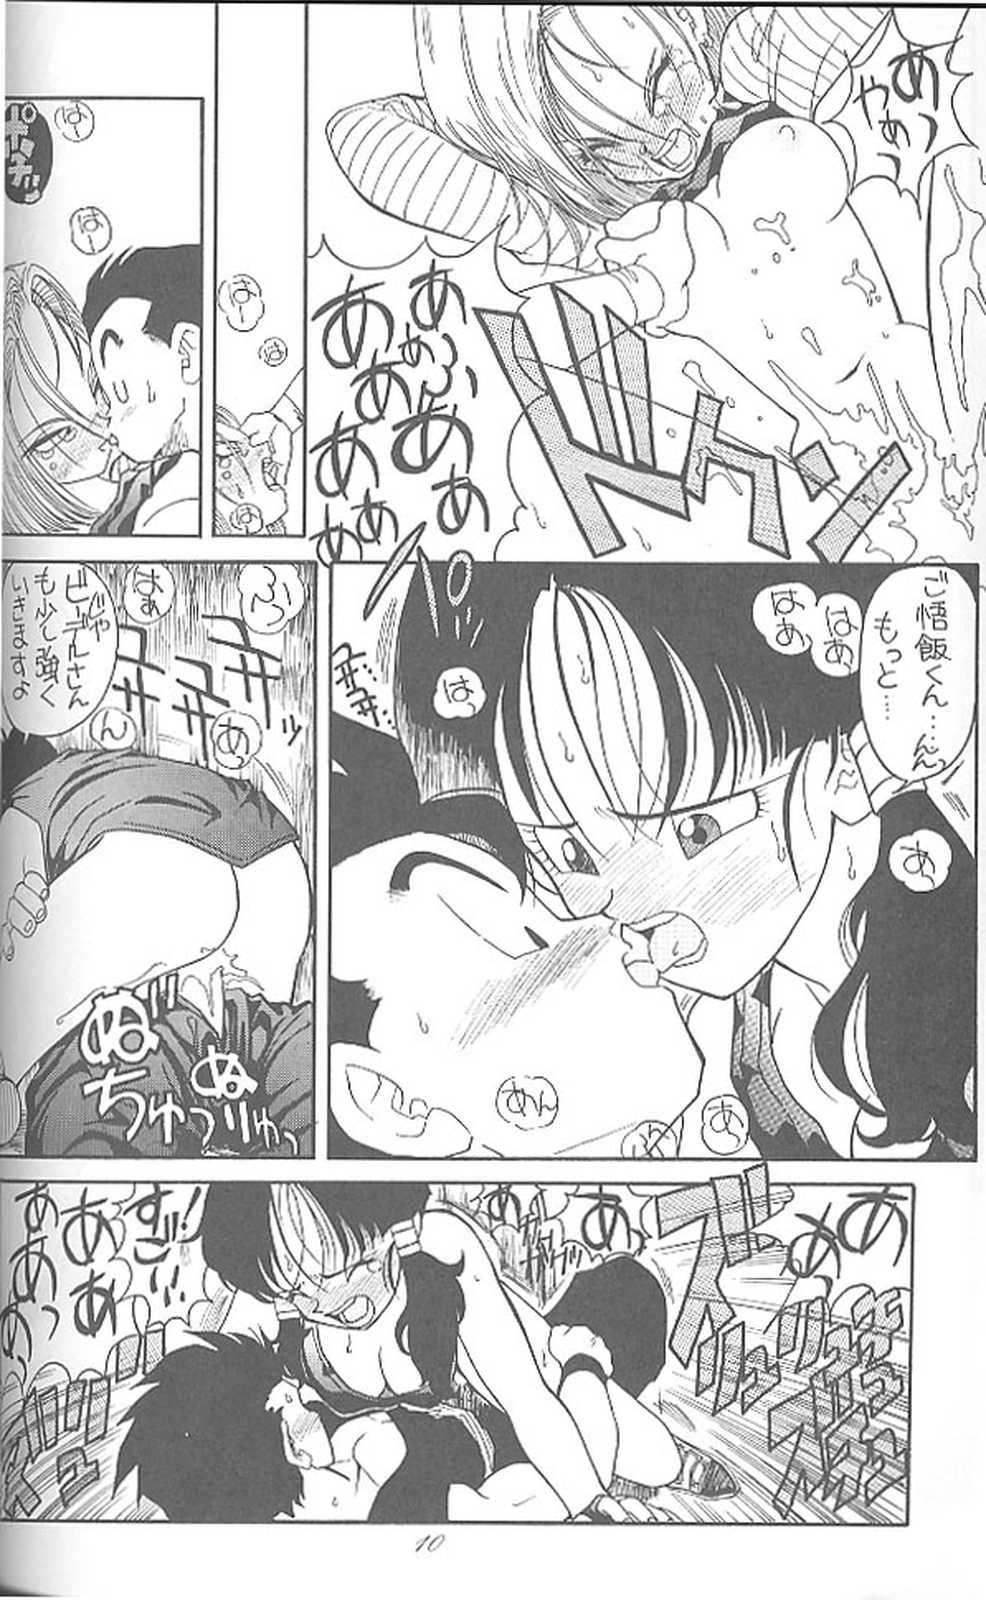 Harcore Haraharatokei vol.4 - Dragon ball z Slayers Dirty pair Ghost sweeper mikami World masterpiece theater Dr. slump Tico of the seven seas Pale - Page 9